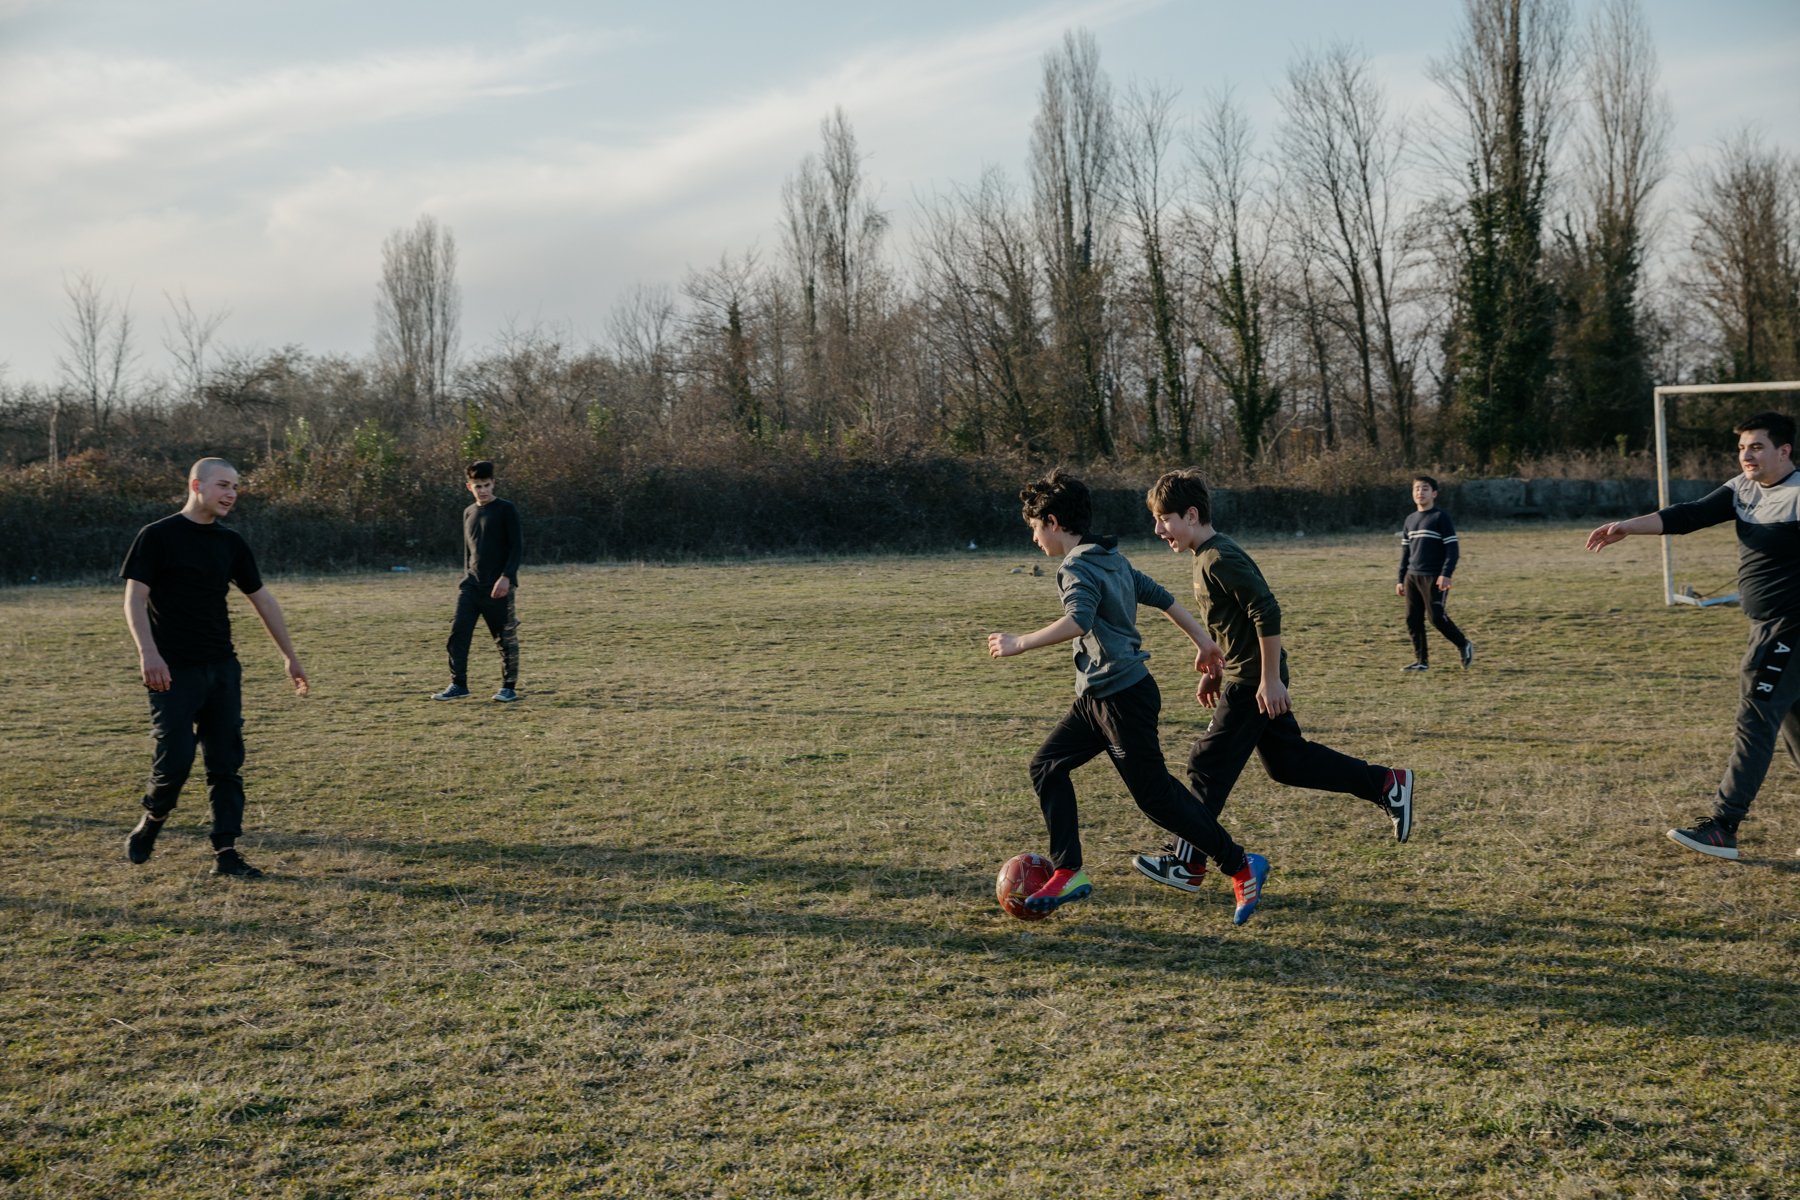  Boys play football in Shamgona, a village that lies a short distance from the nearest Russian troops on the other side of the Enguri River. 